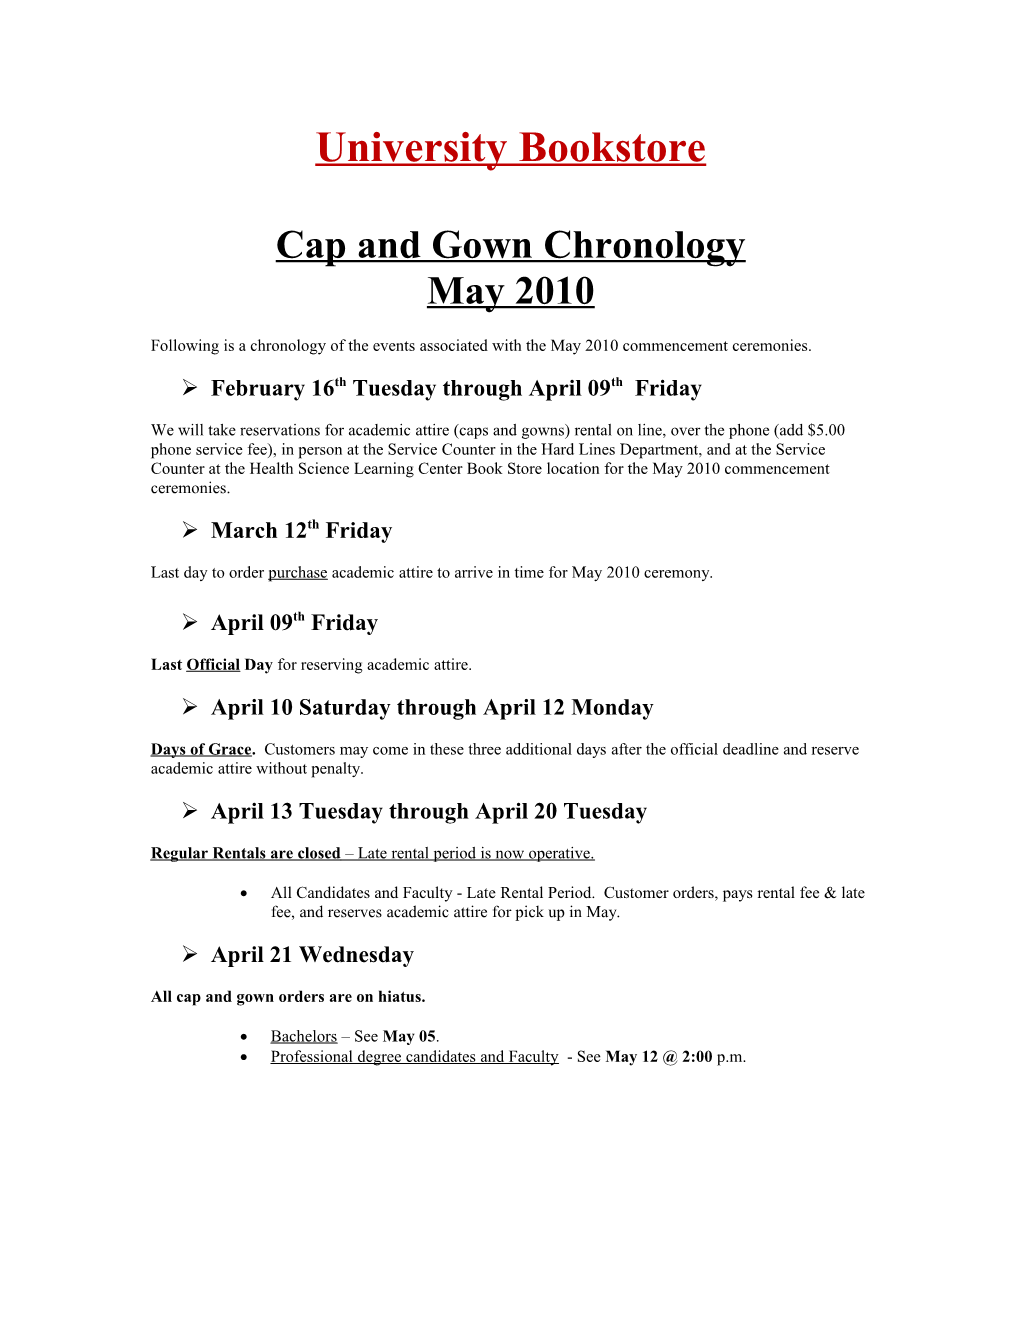 Cap and Gown Chronology